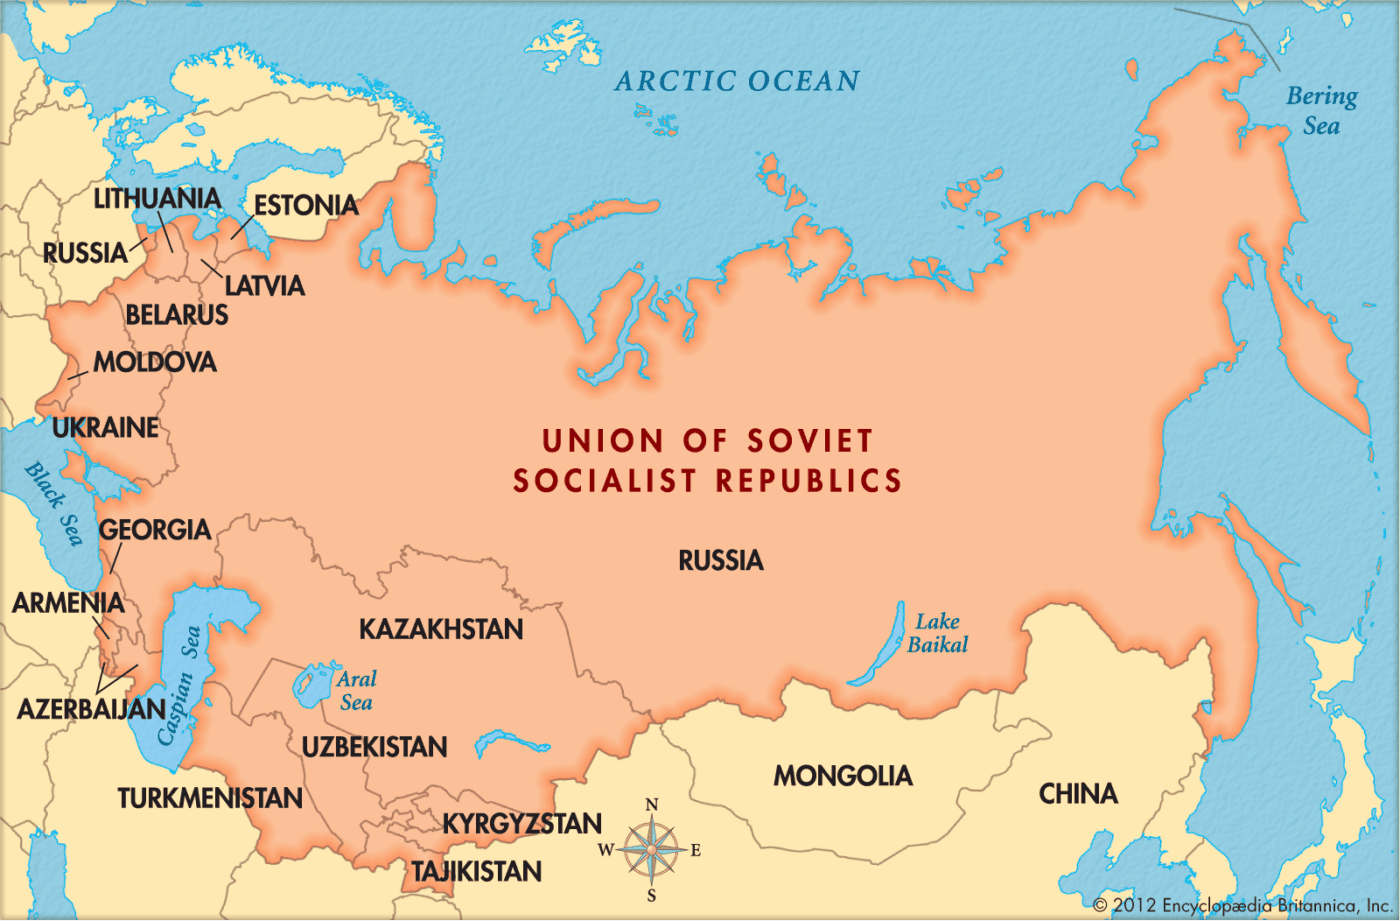 USSR-map-by-Encyclopedia-Britannica-1400x921, Money, money, money: The real deal behind Putin's invasion of Ukraine, Behind Enemy Lines News & Views World News & Views 